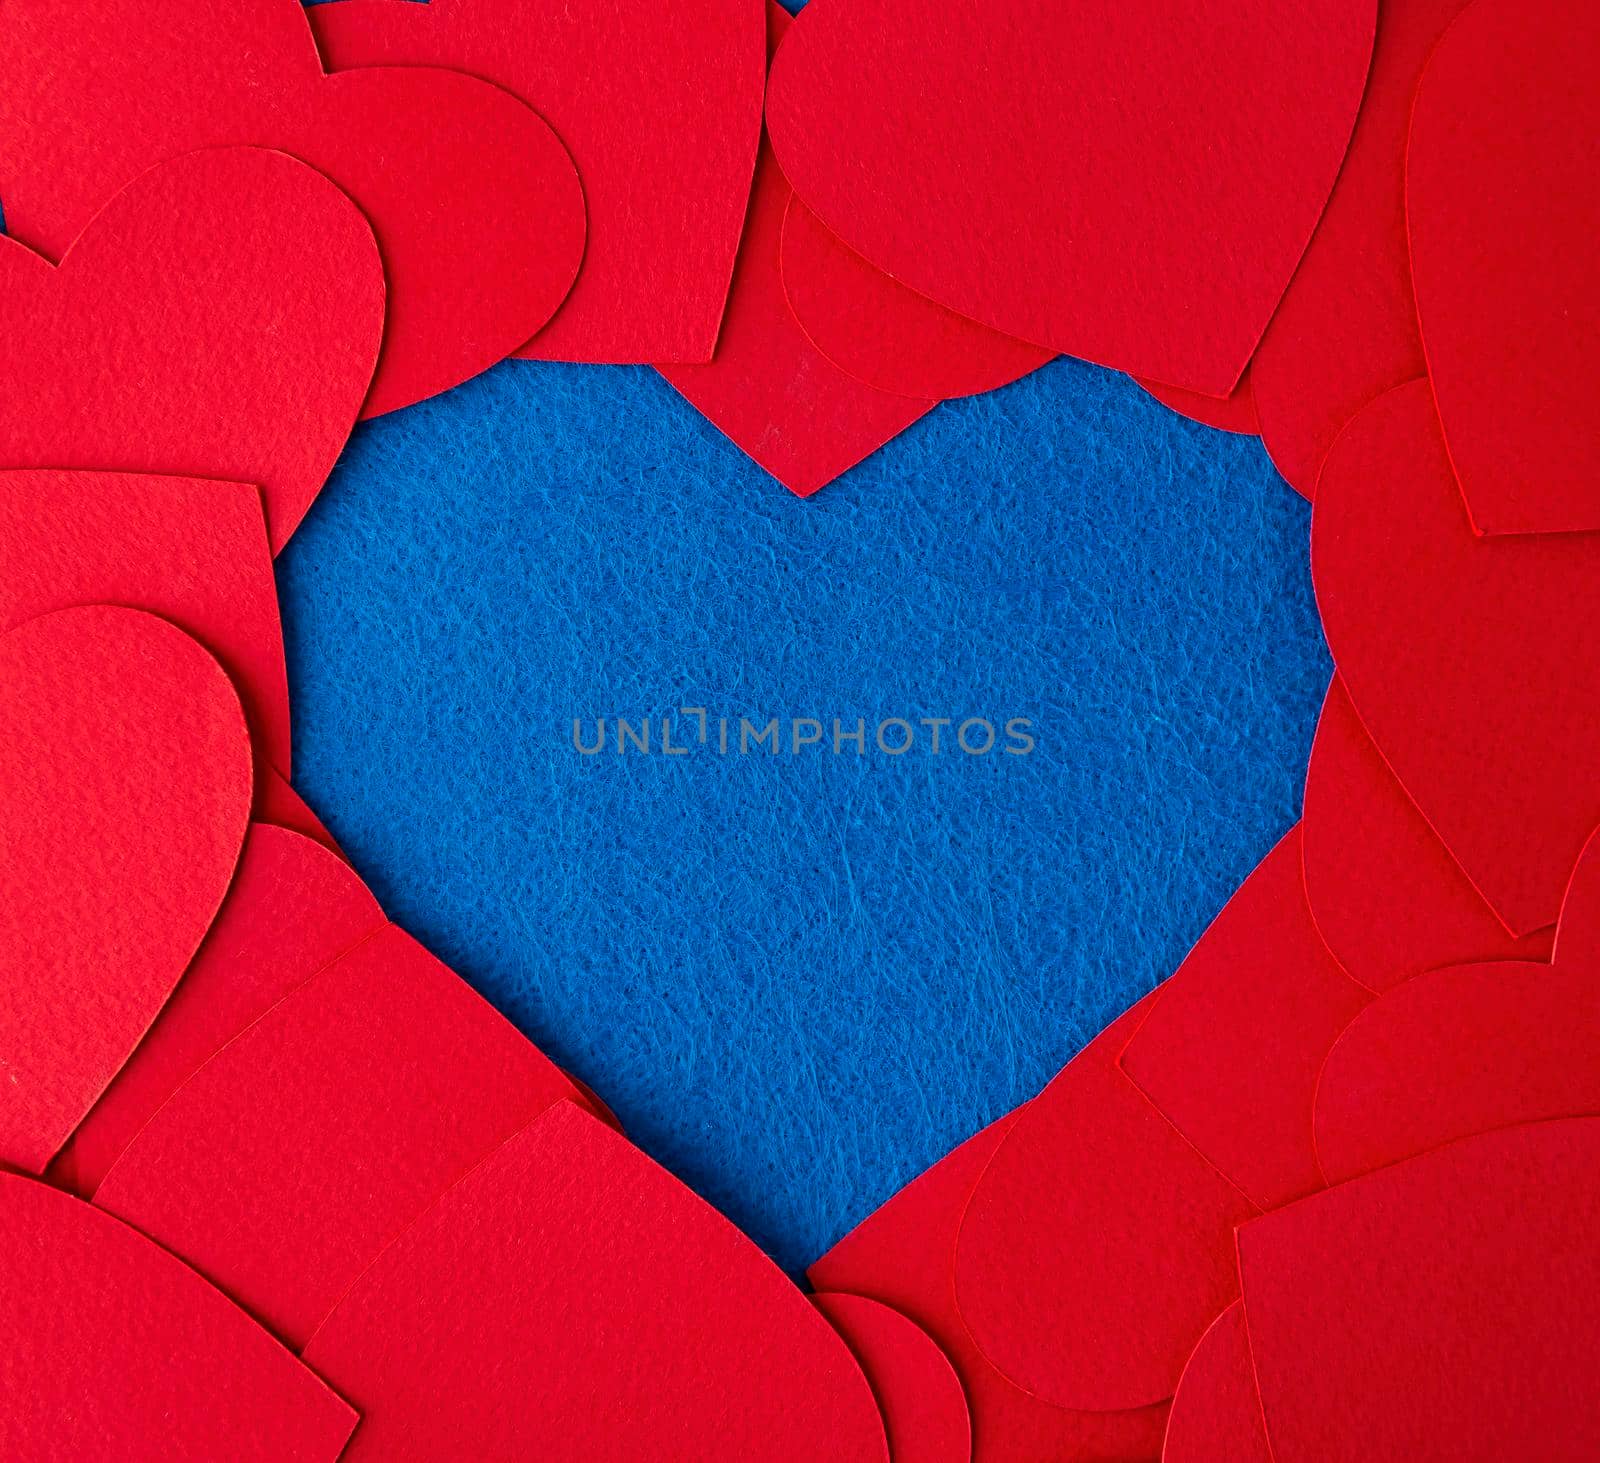 Paper cut red hearts frame on blue textured background with copy space. Concept image. Valentine's day, mother's day, birthday greeting cards, invitation, celebration